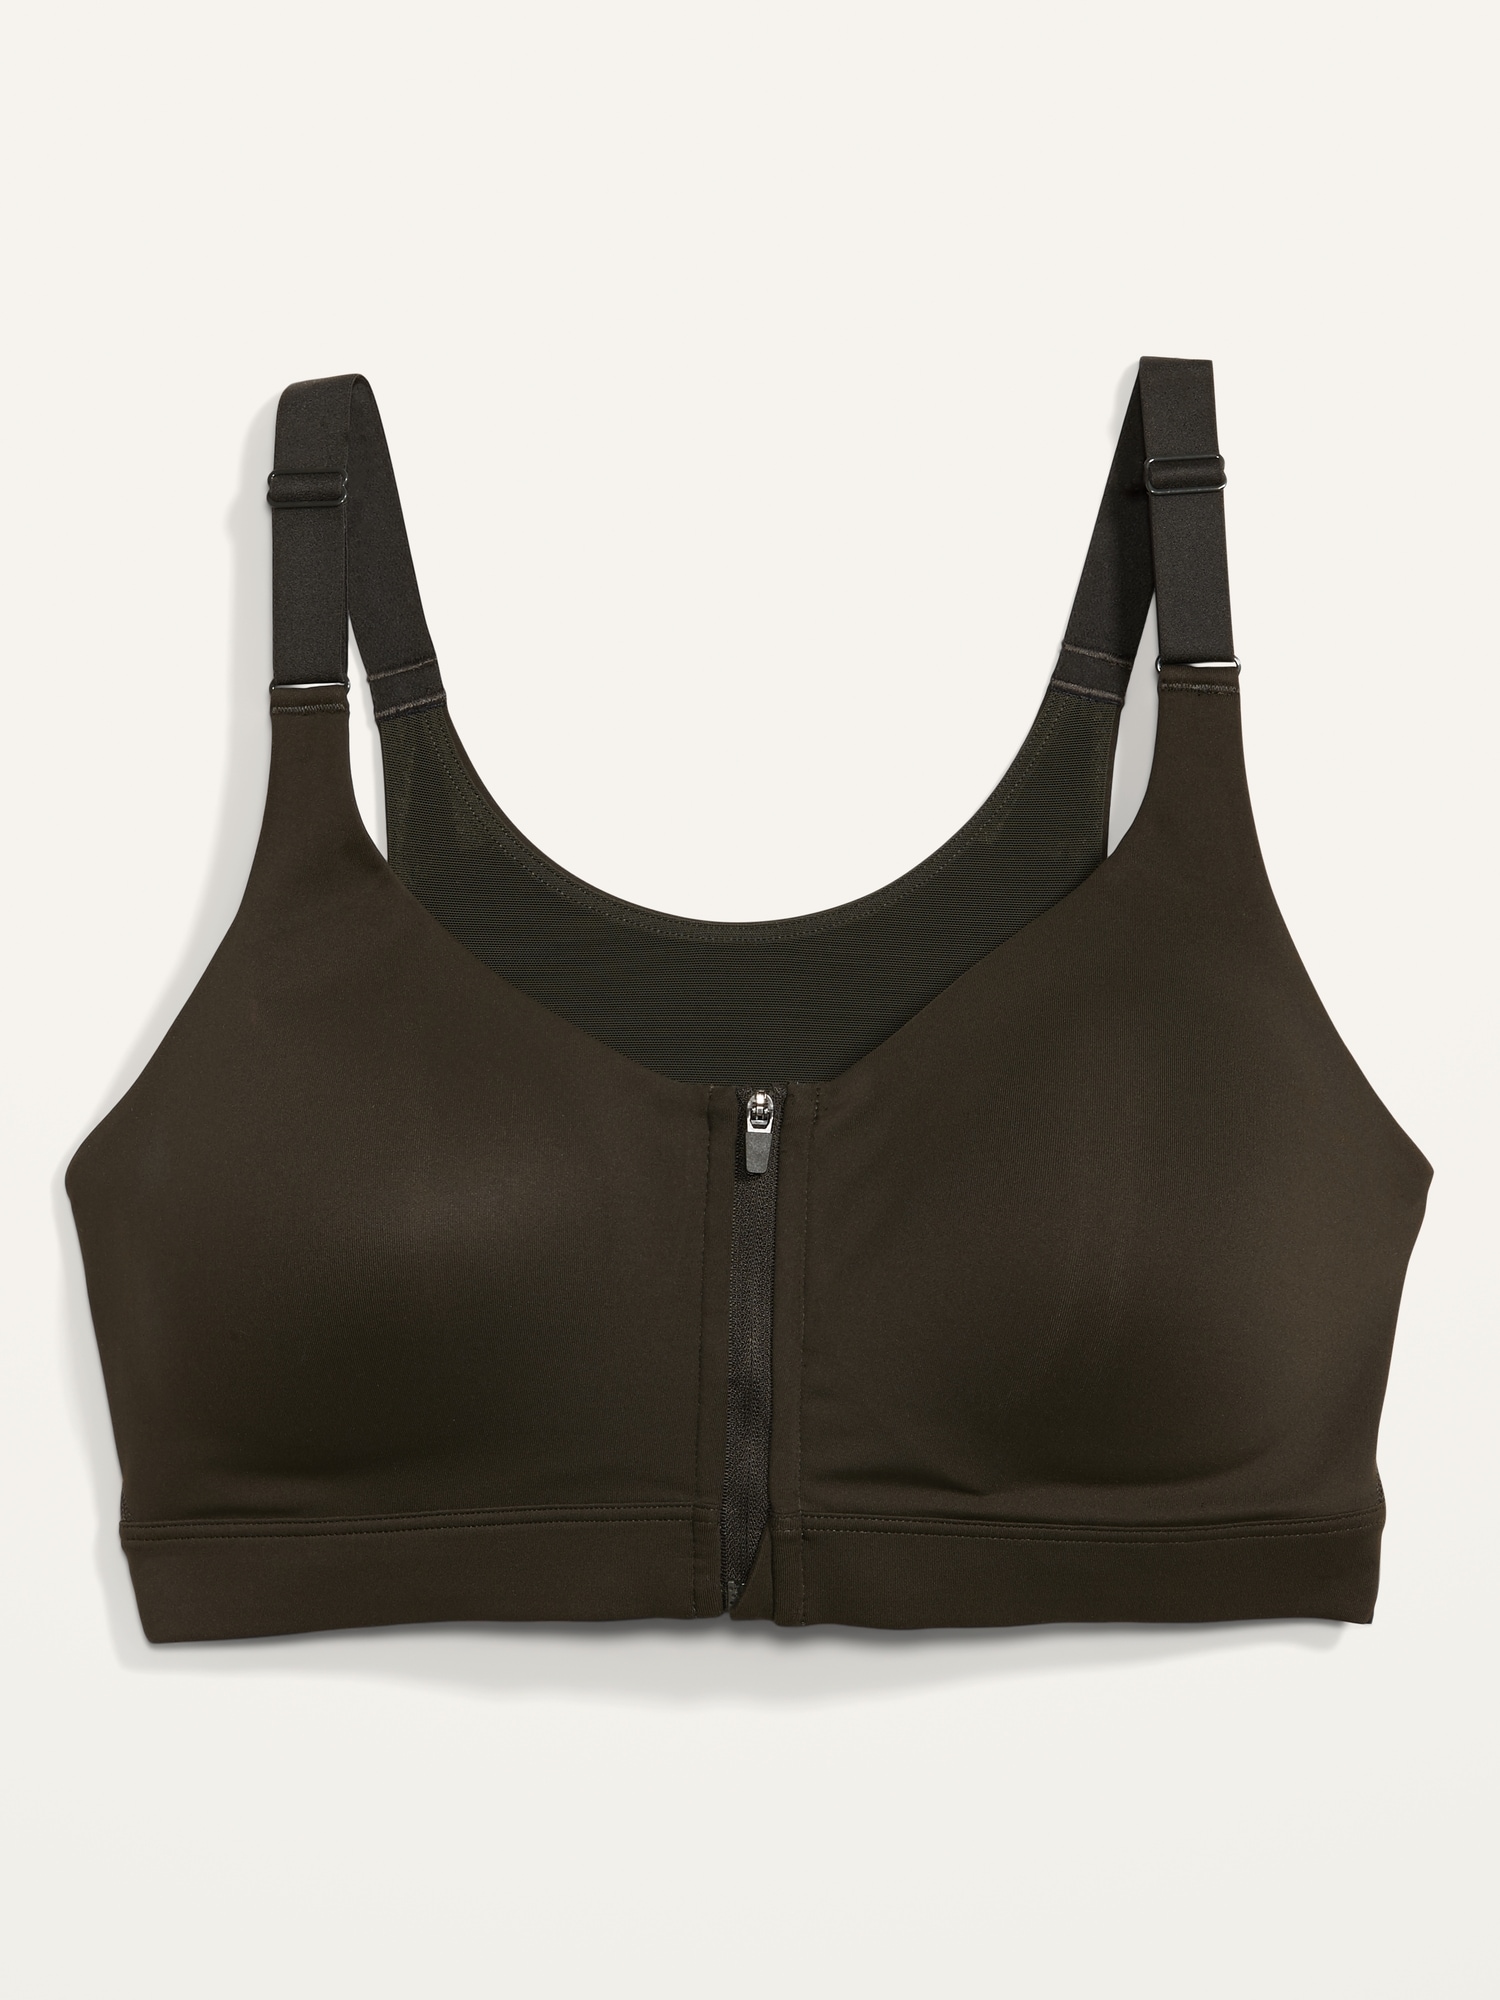 Old Navy DD Cup Active Sports Bras